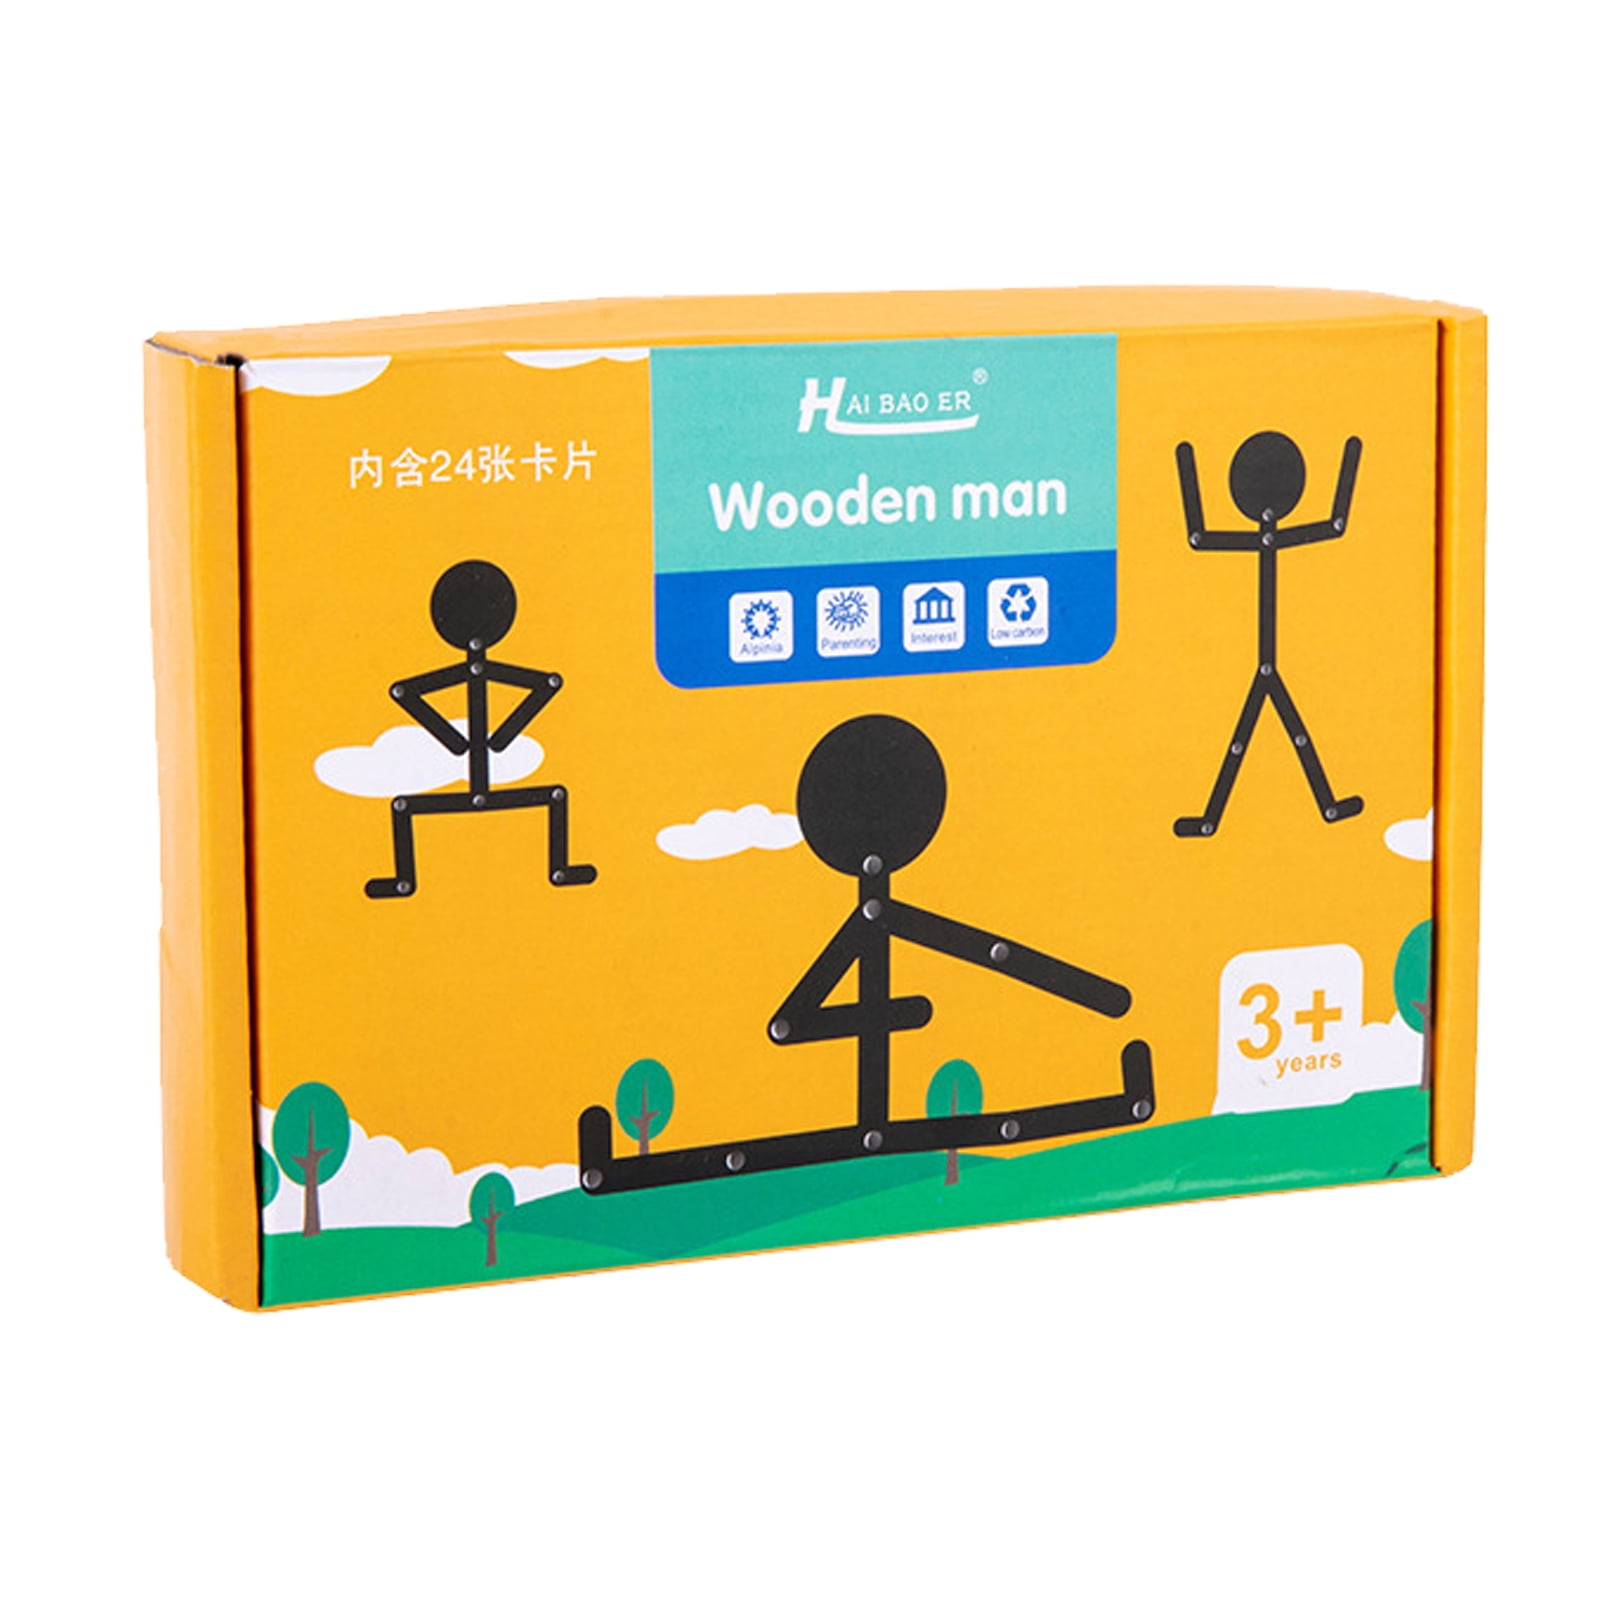 Shanrya Wooden Stickman Toy, Black Wooden Stick Man Toy with 24 Cards Party  Puzzle Toy Educational Game Gift for Above 3 Years Old, ShanryaKJed3p8K